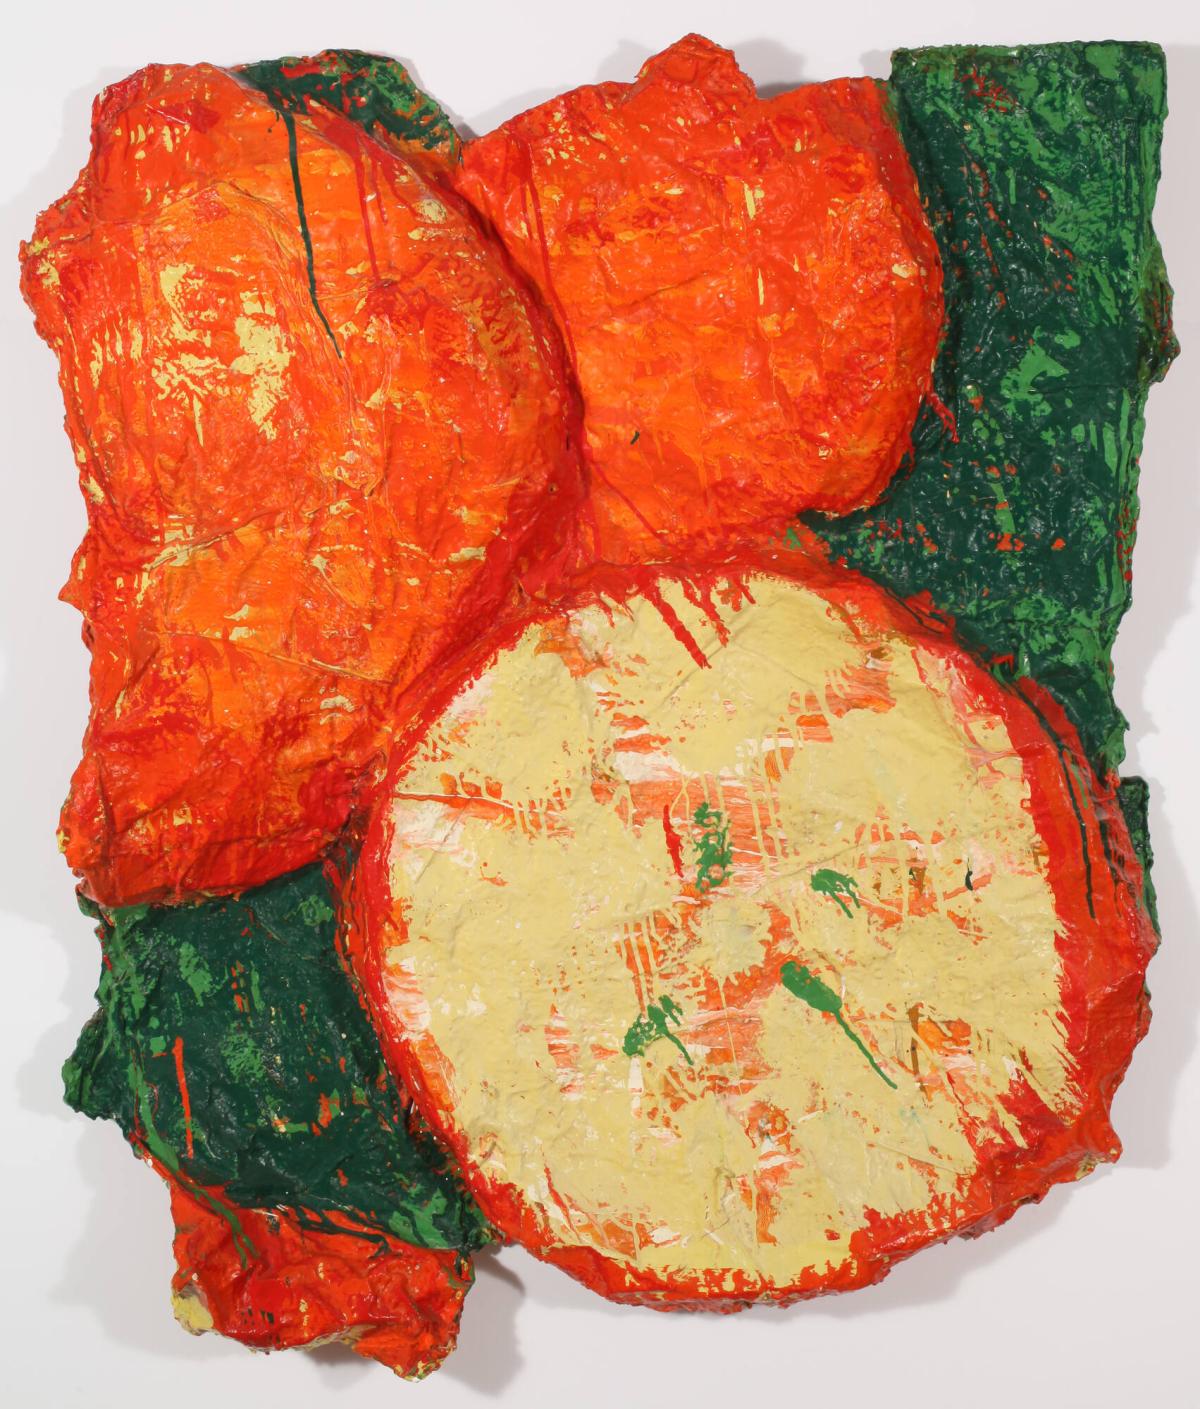 Oranges Advertisement, from the series The Store